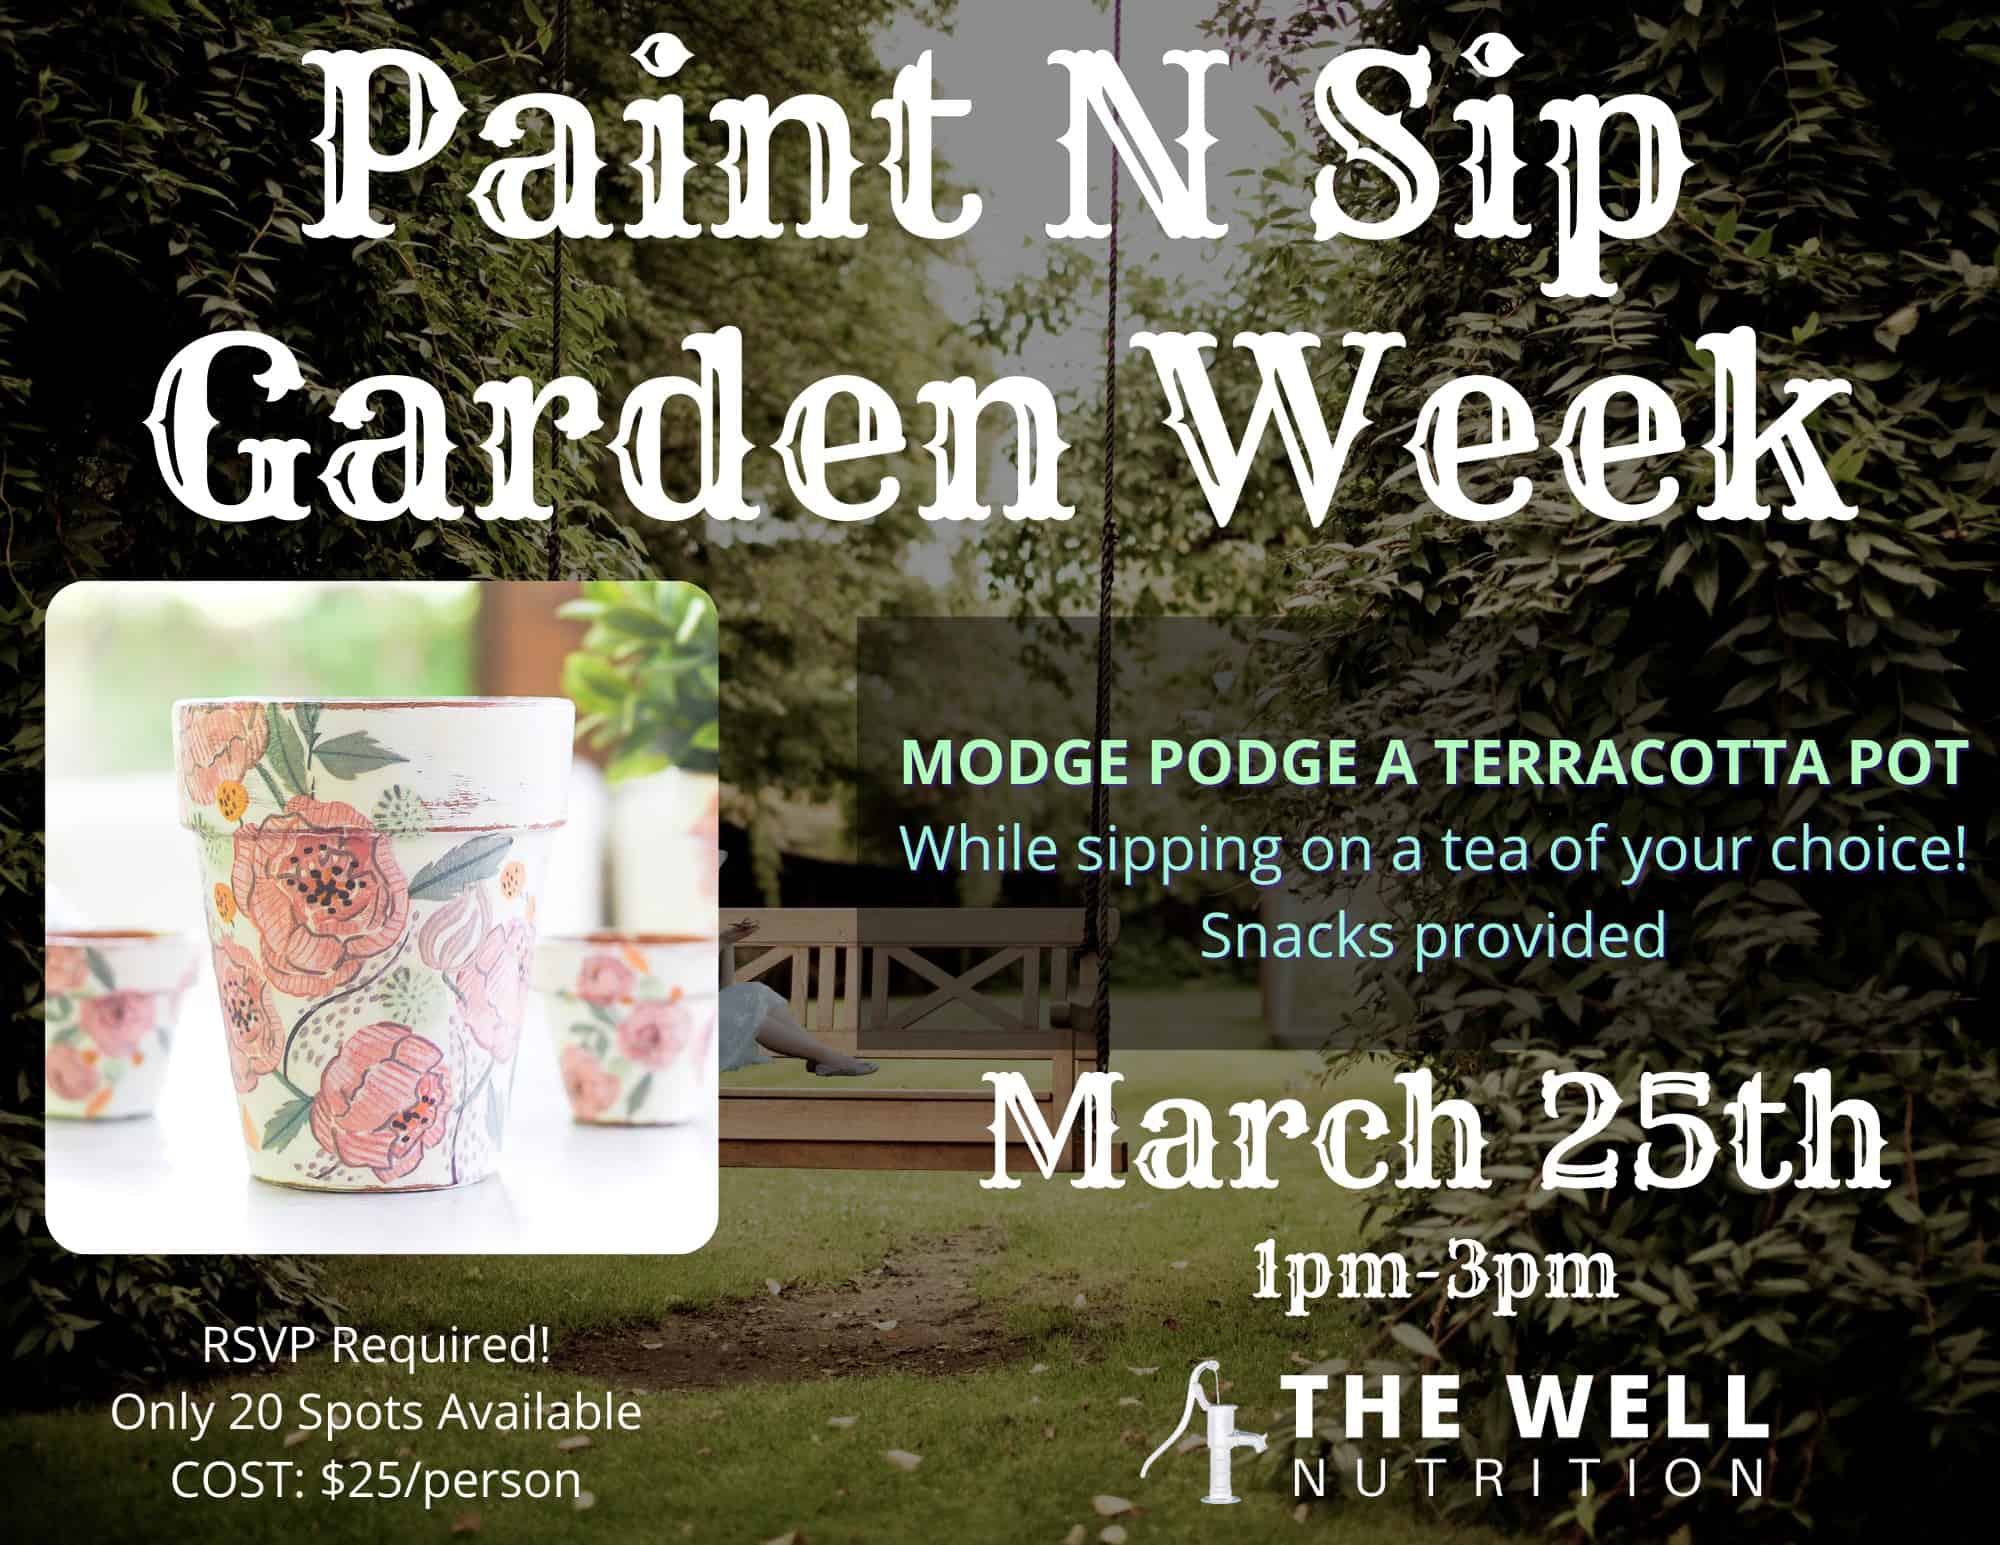 The Wellness Nutrition Garden and Sip Day